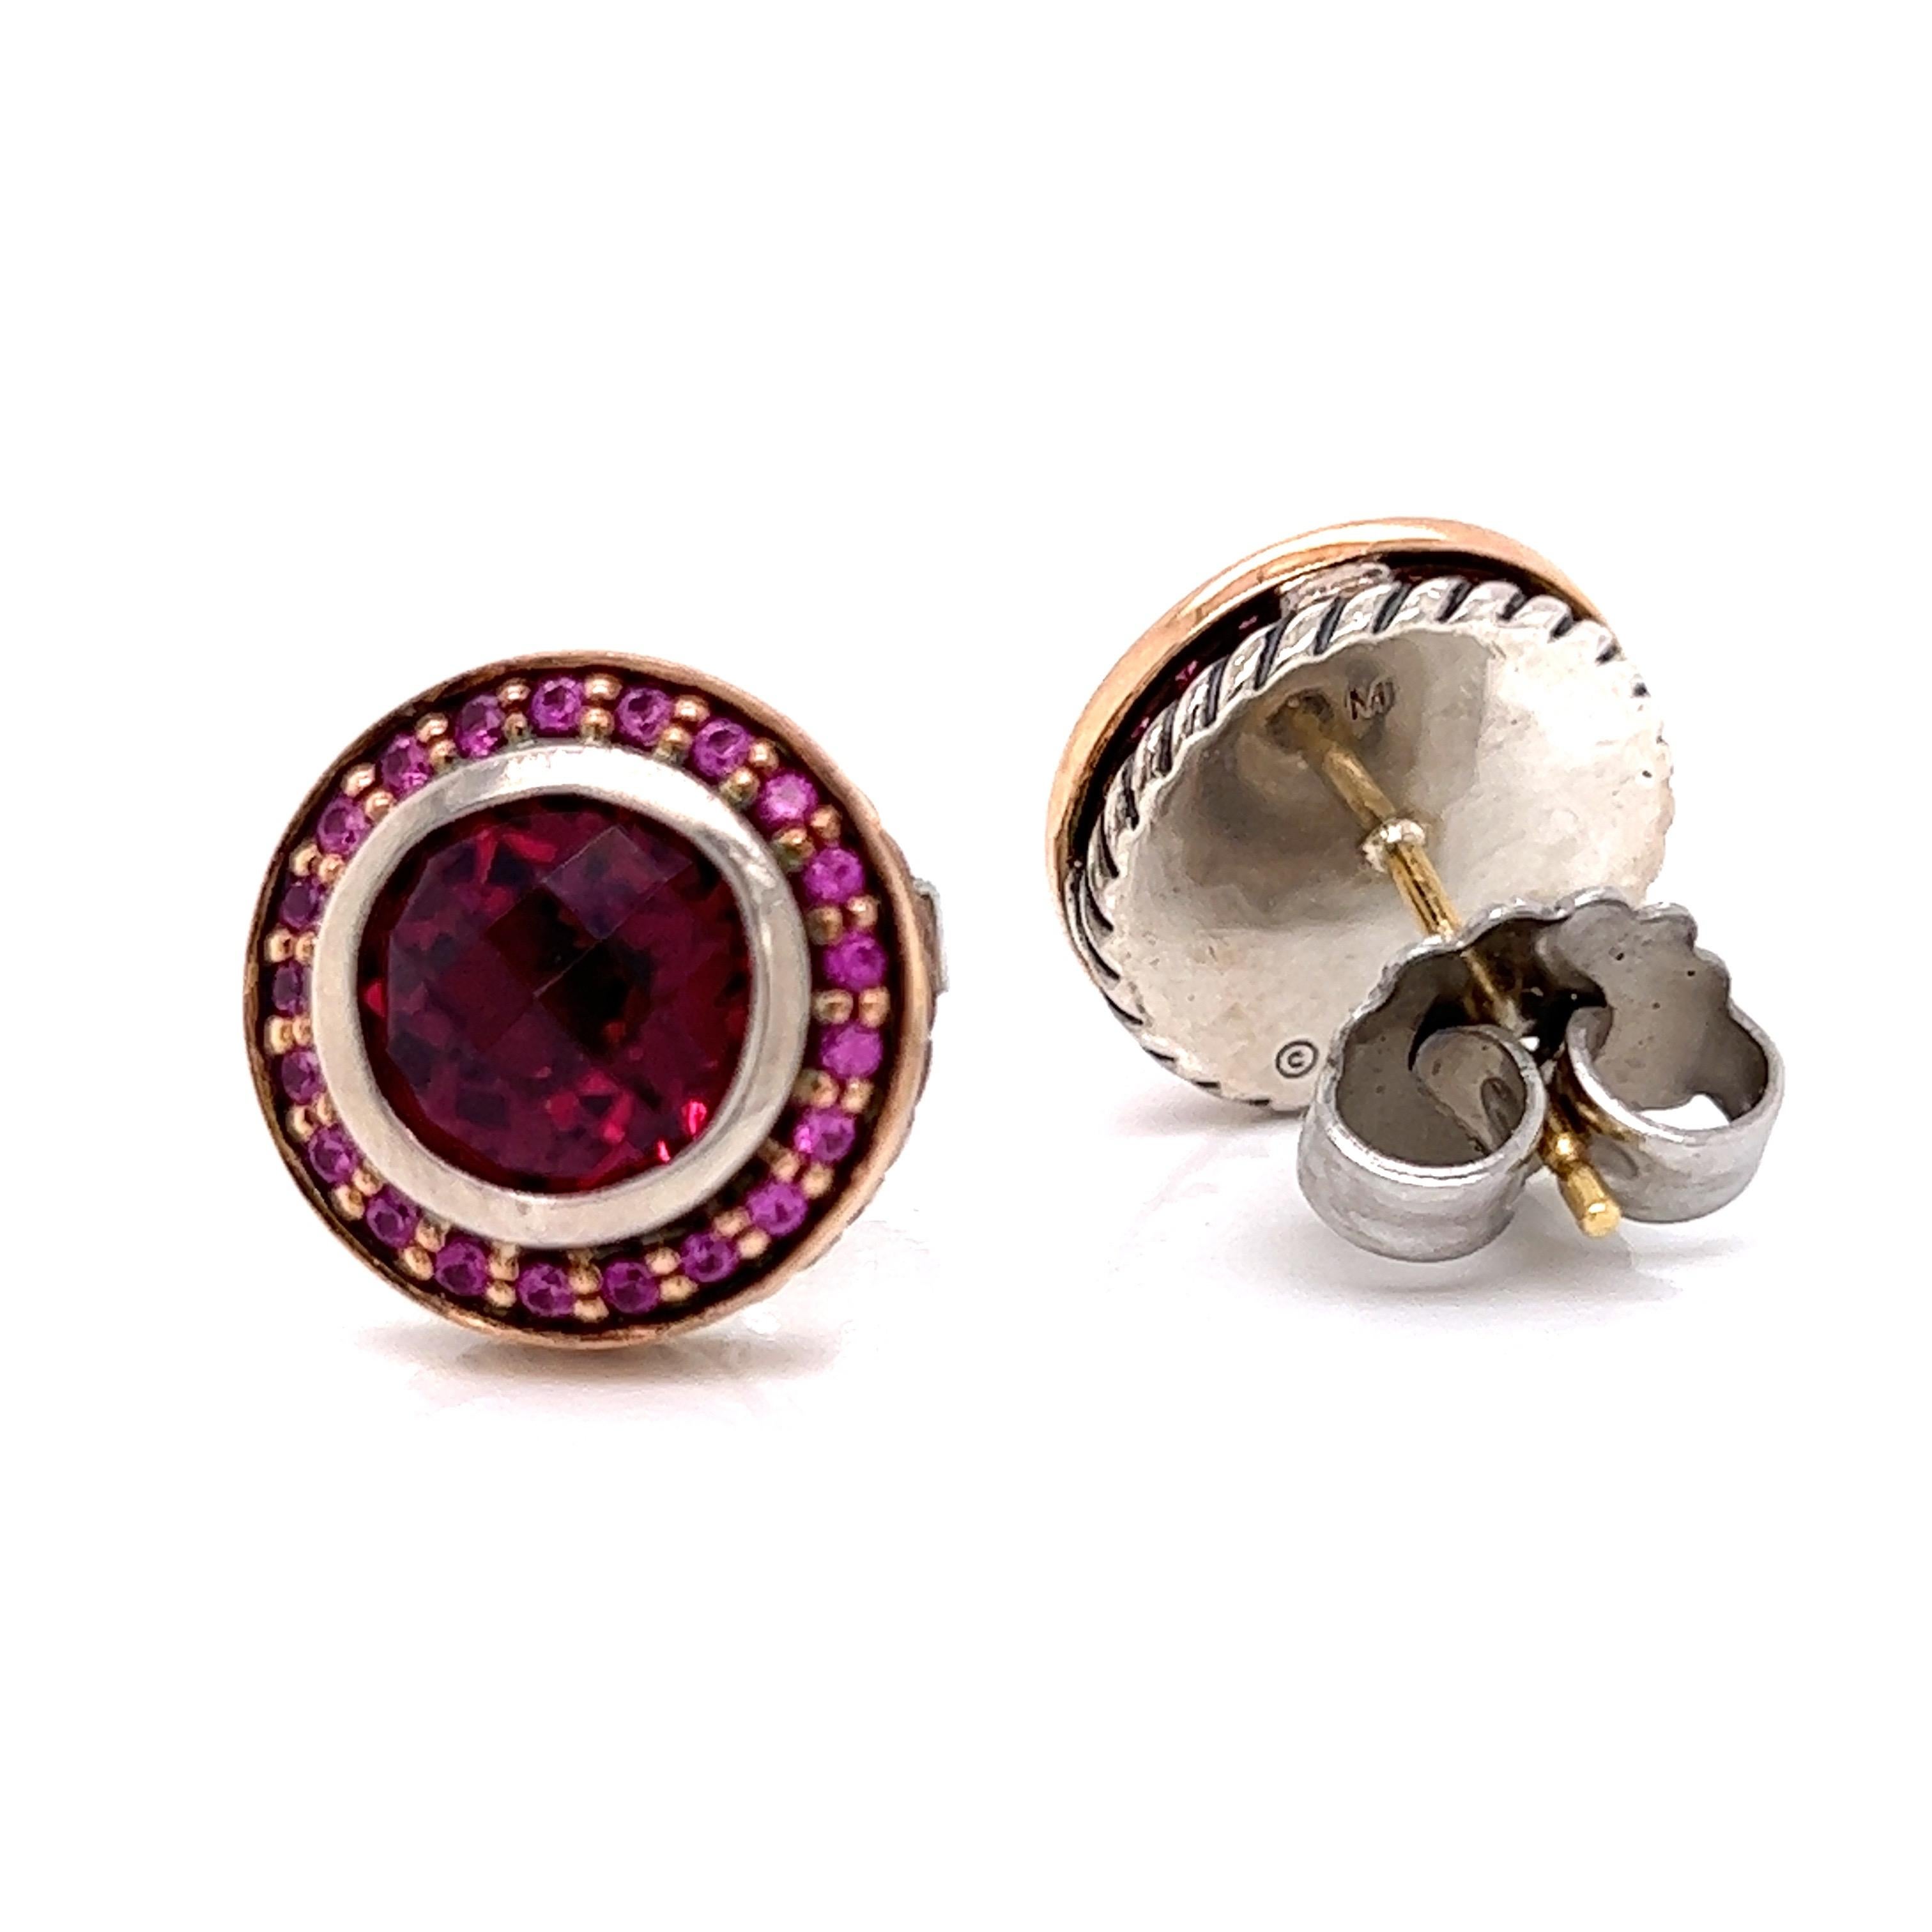 This pinkalicious pair of David Yurman estate earrings are from the Albion Collection.  In the center of each earring is a vibrant eight millimeter faceted rhodolite garnet surrounded by pink sapphires  Mounted in sterling silver and 18 Kt yellow